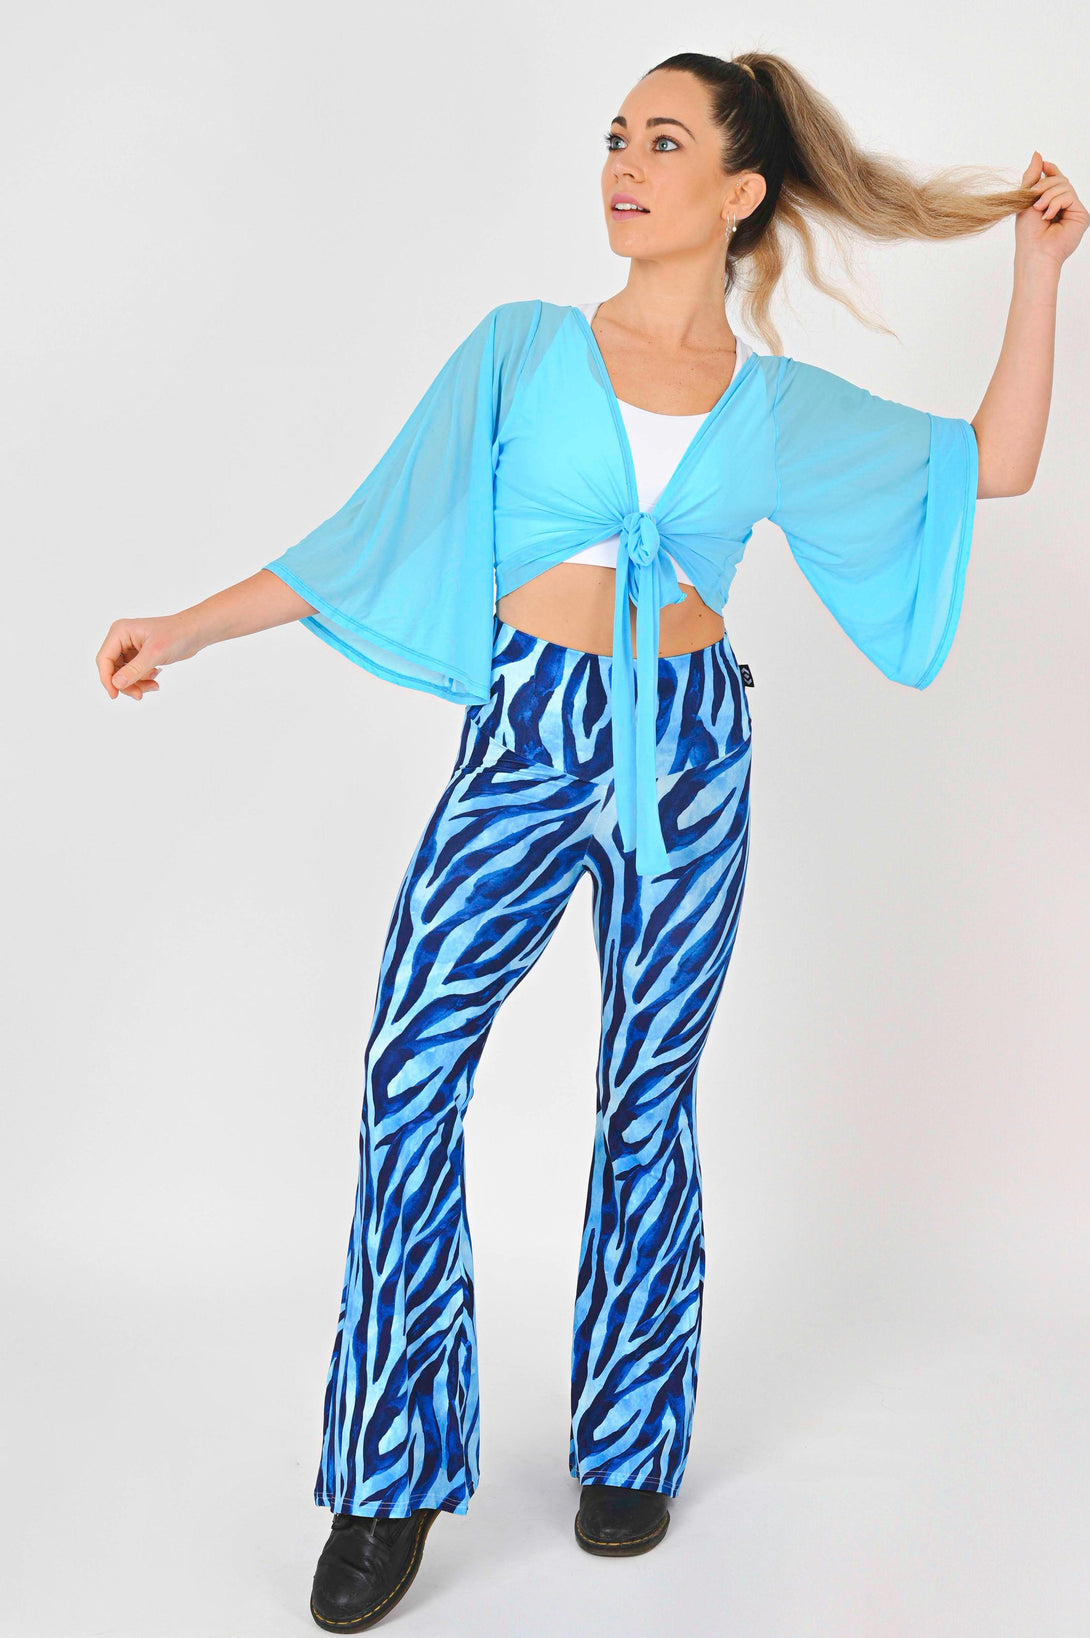 Wild Zebra Blue Soft To Touch - High Waisted Bells-Activewear-Exoticathletica